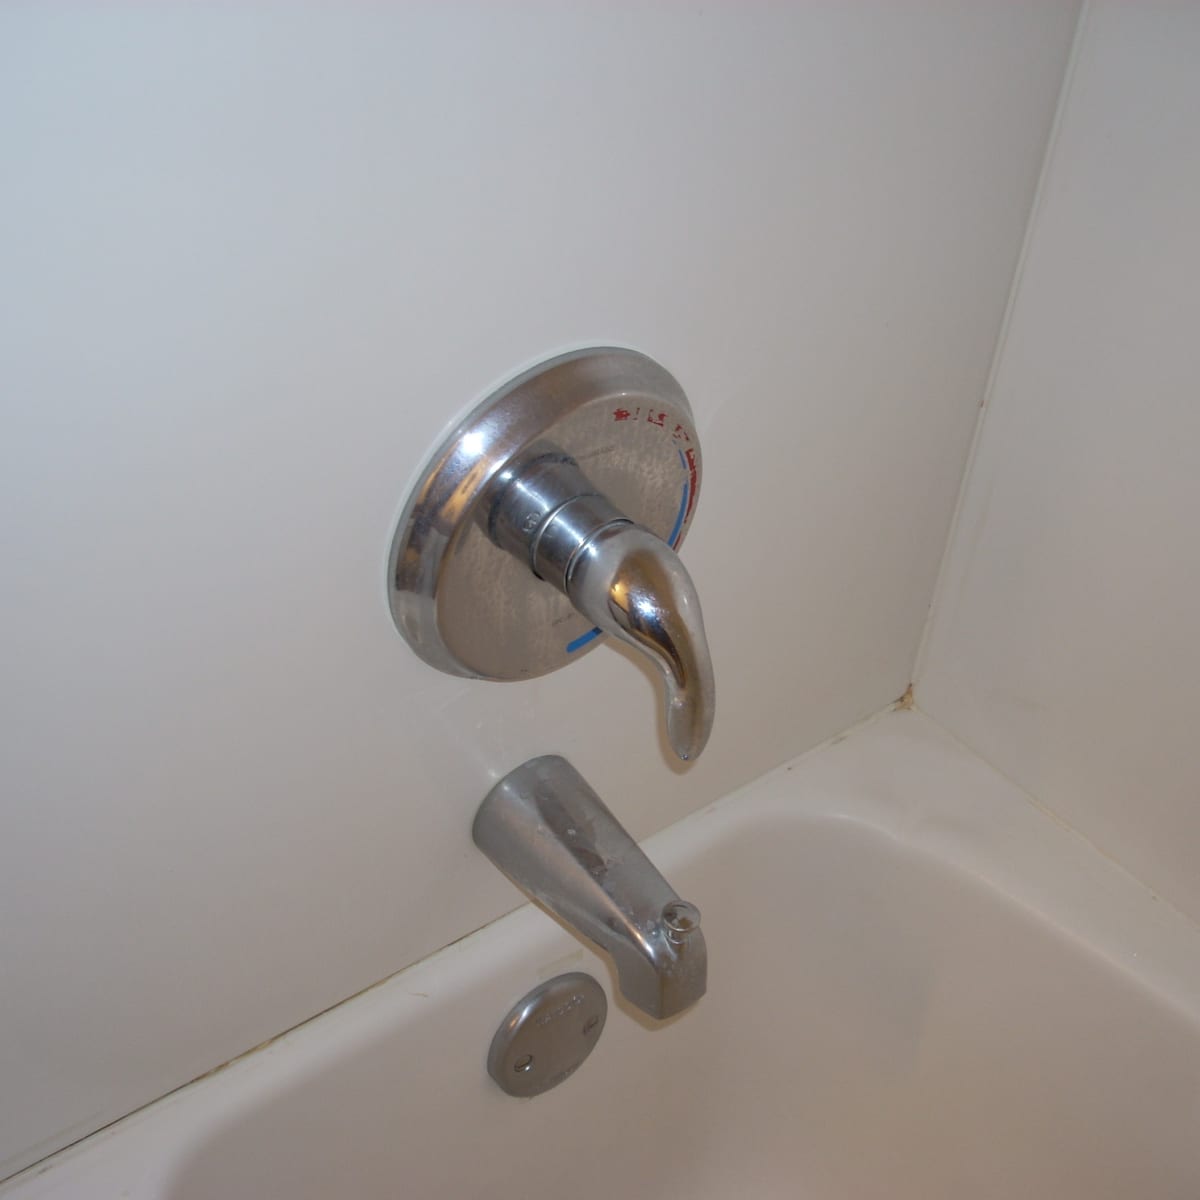 Single Handle Bathtub Faucet Yourself, How To Replace Bathtub Fixtures